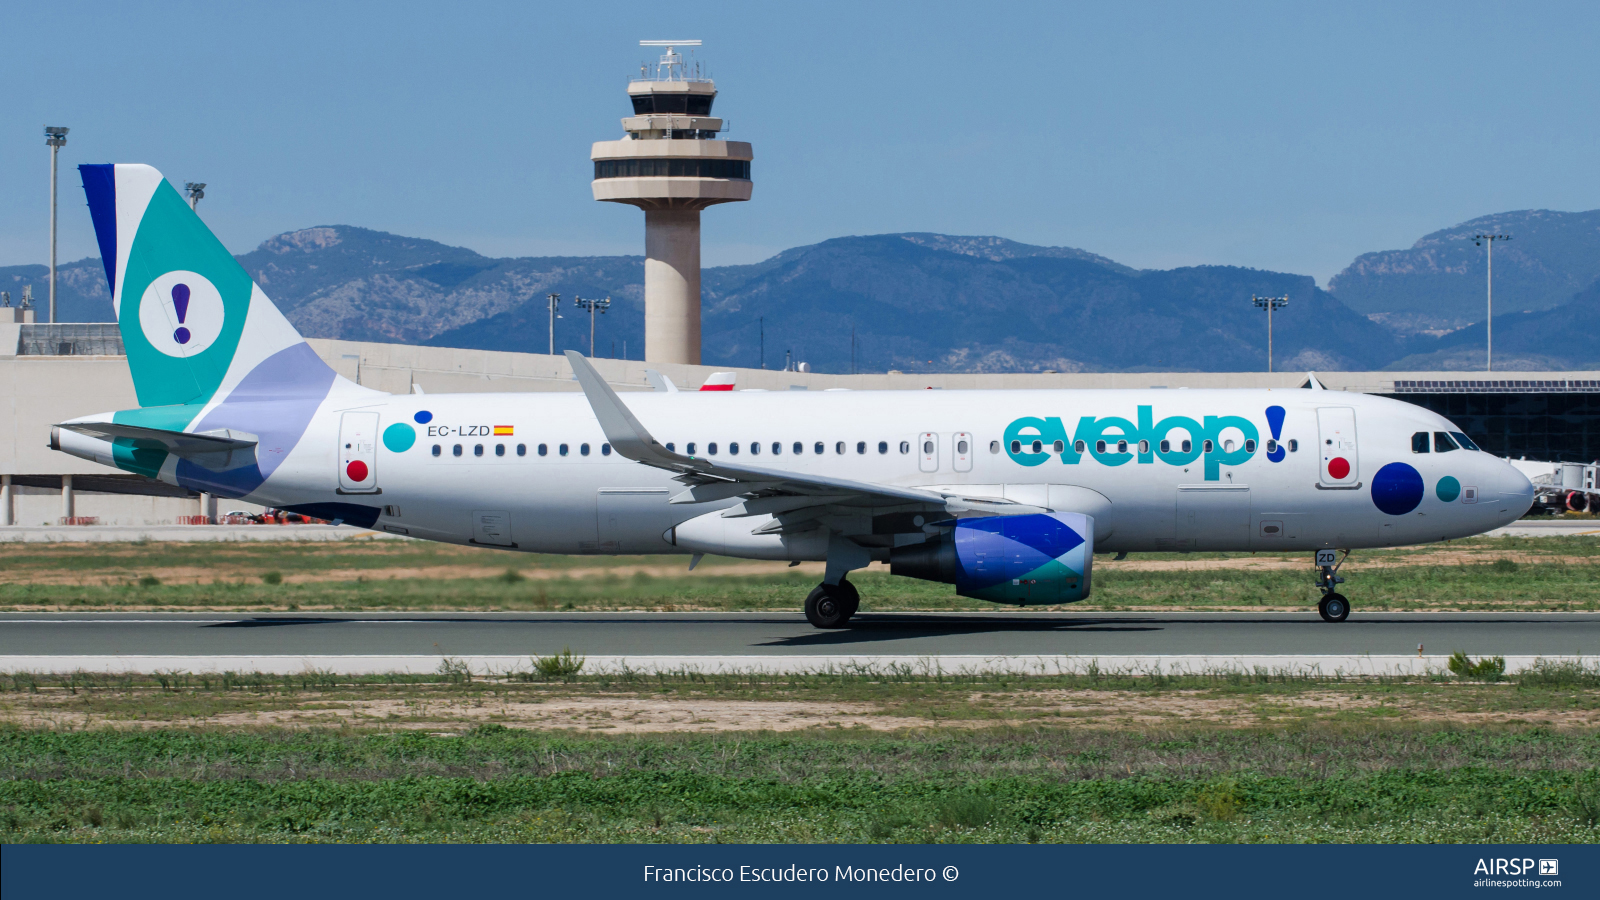 Evelop Airlines  Airbus A320  EC-LZD